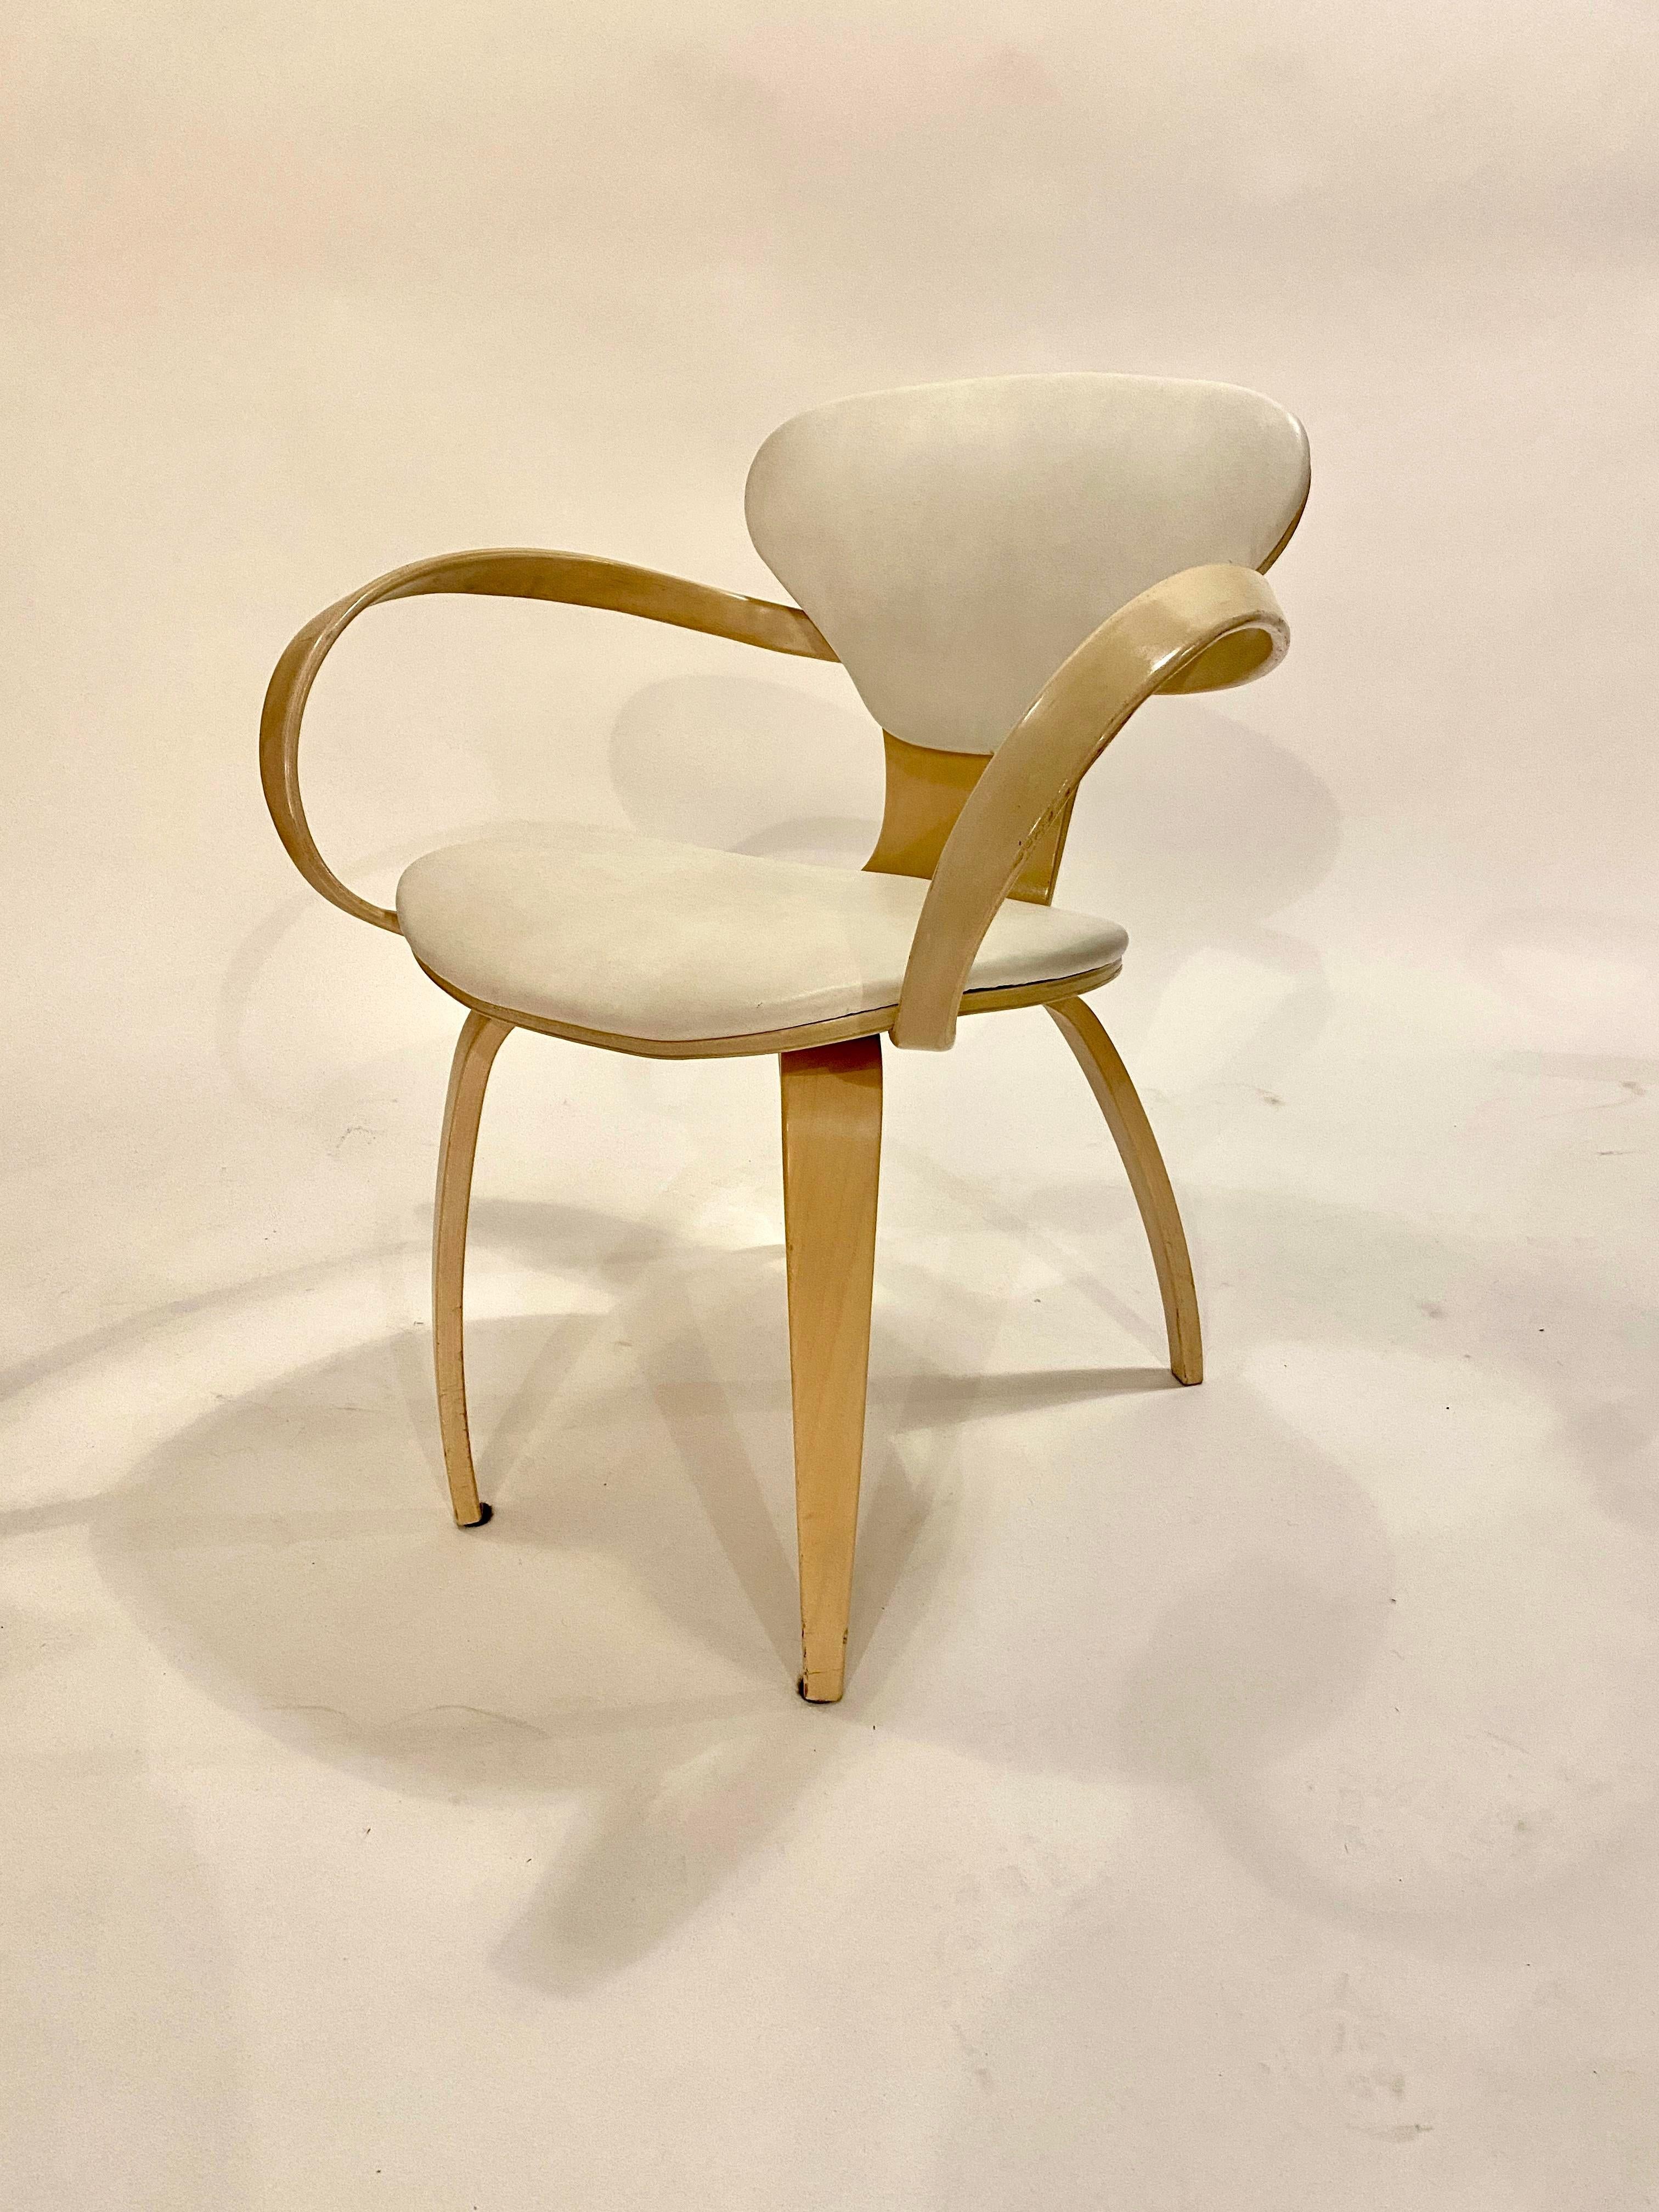 20th Century Norman Cherner Pretzel Chairs in Leather and Wood Frame by Plycraft, Set of 4 For Sale